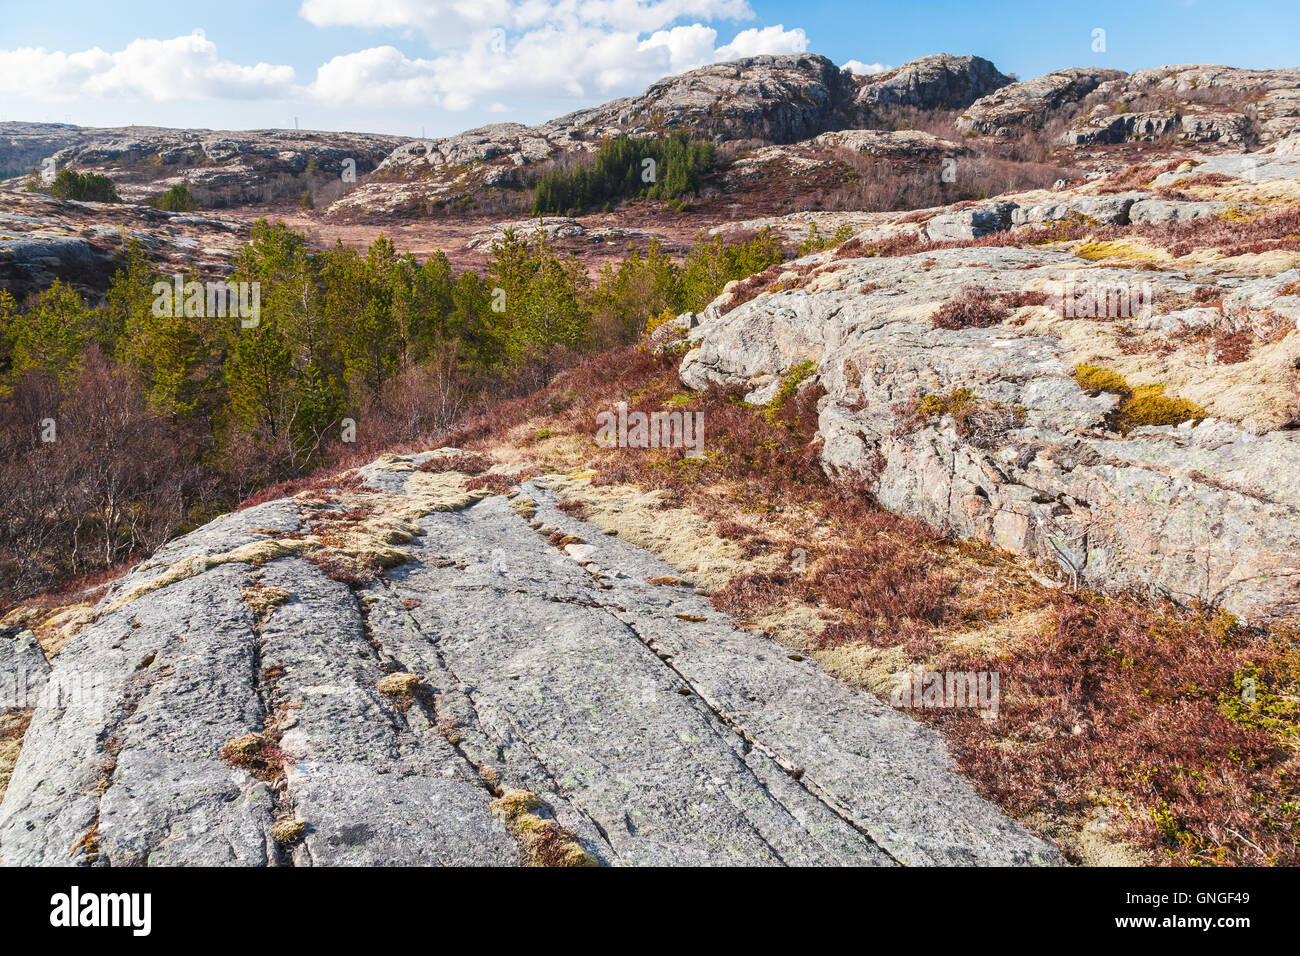 Northern Norway in springtime. Mountain landscape with trees red moss growing on rocks Stock Photo